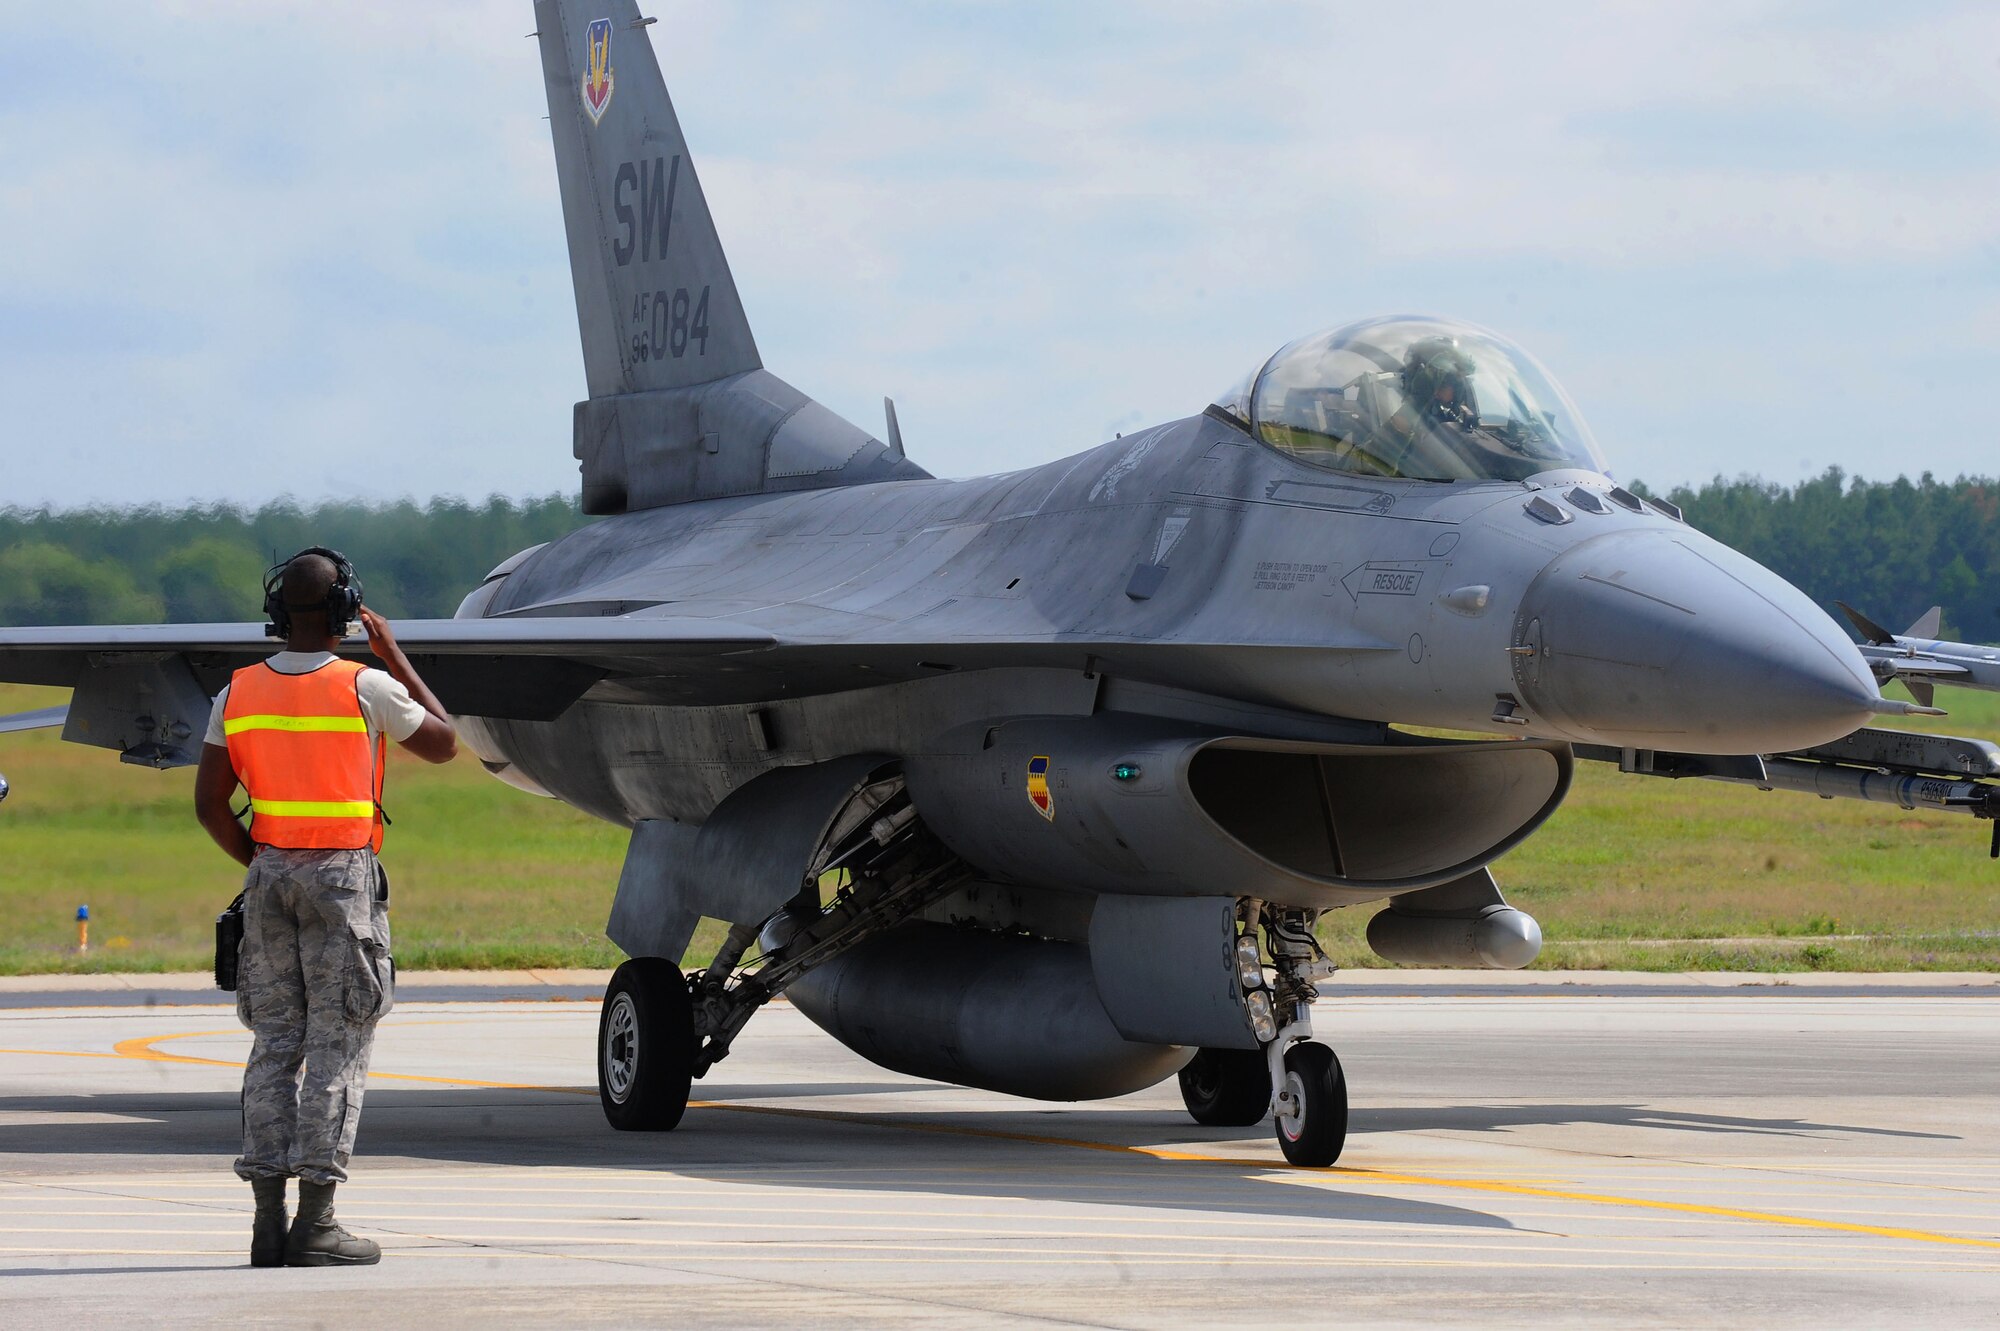 U.S. Air Force Airman 1st Class Jordan Cotton, 20th Aircraft Maintenance Squadron, 77th Aircraft Maintenance Unit tactical aircraft maintainer, salutes Maj. Justin Lewis, 55th Fighter Squadron F-16CJ Fighting Falcon pilot, before take-off at Shaw Air Force Base, S.C., July 23, 2014.Airman inspecting the aircrafts at the end of the run way before take-off to ensure it is functioning properly. (U.S. Air Force photo by Airman 1st Class Michael A. Cossaboom/Released)